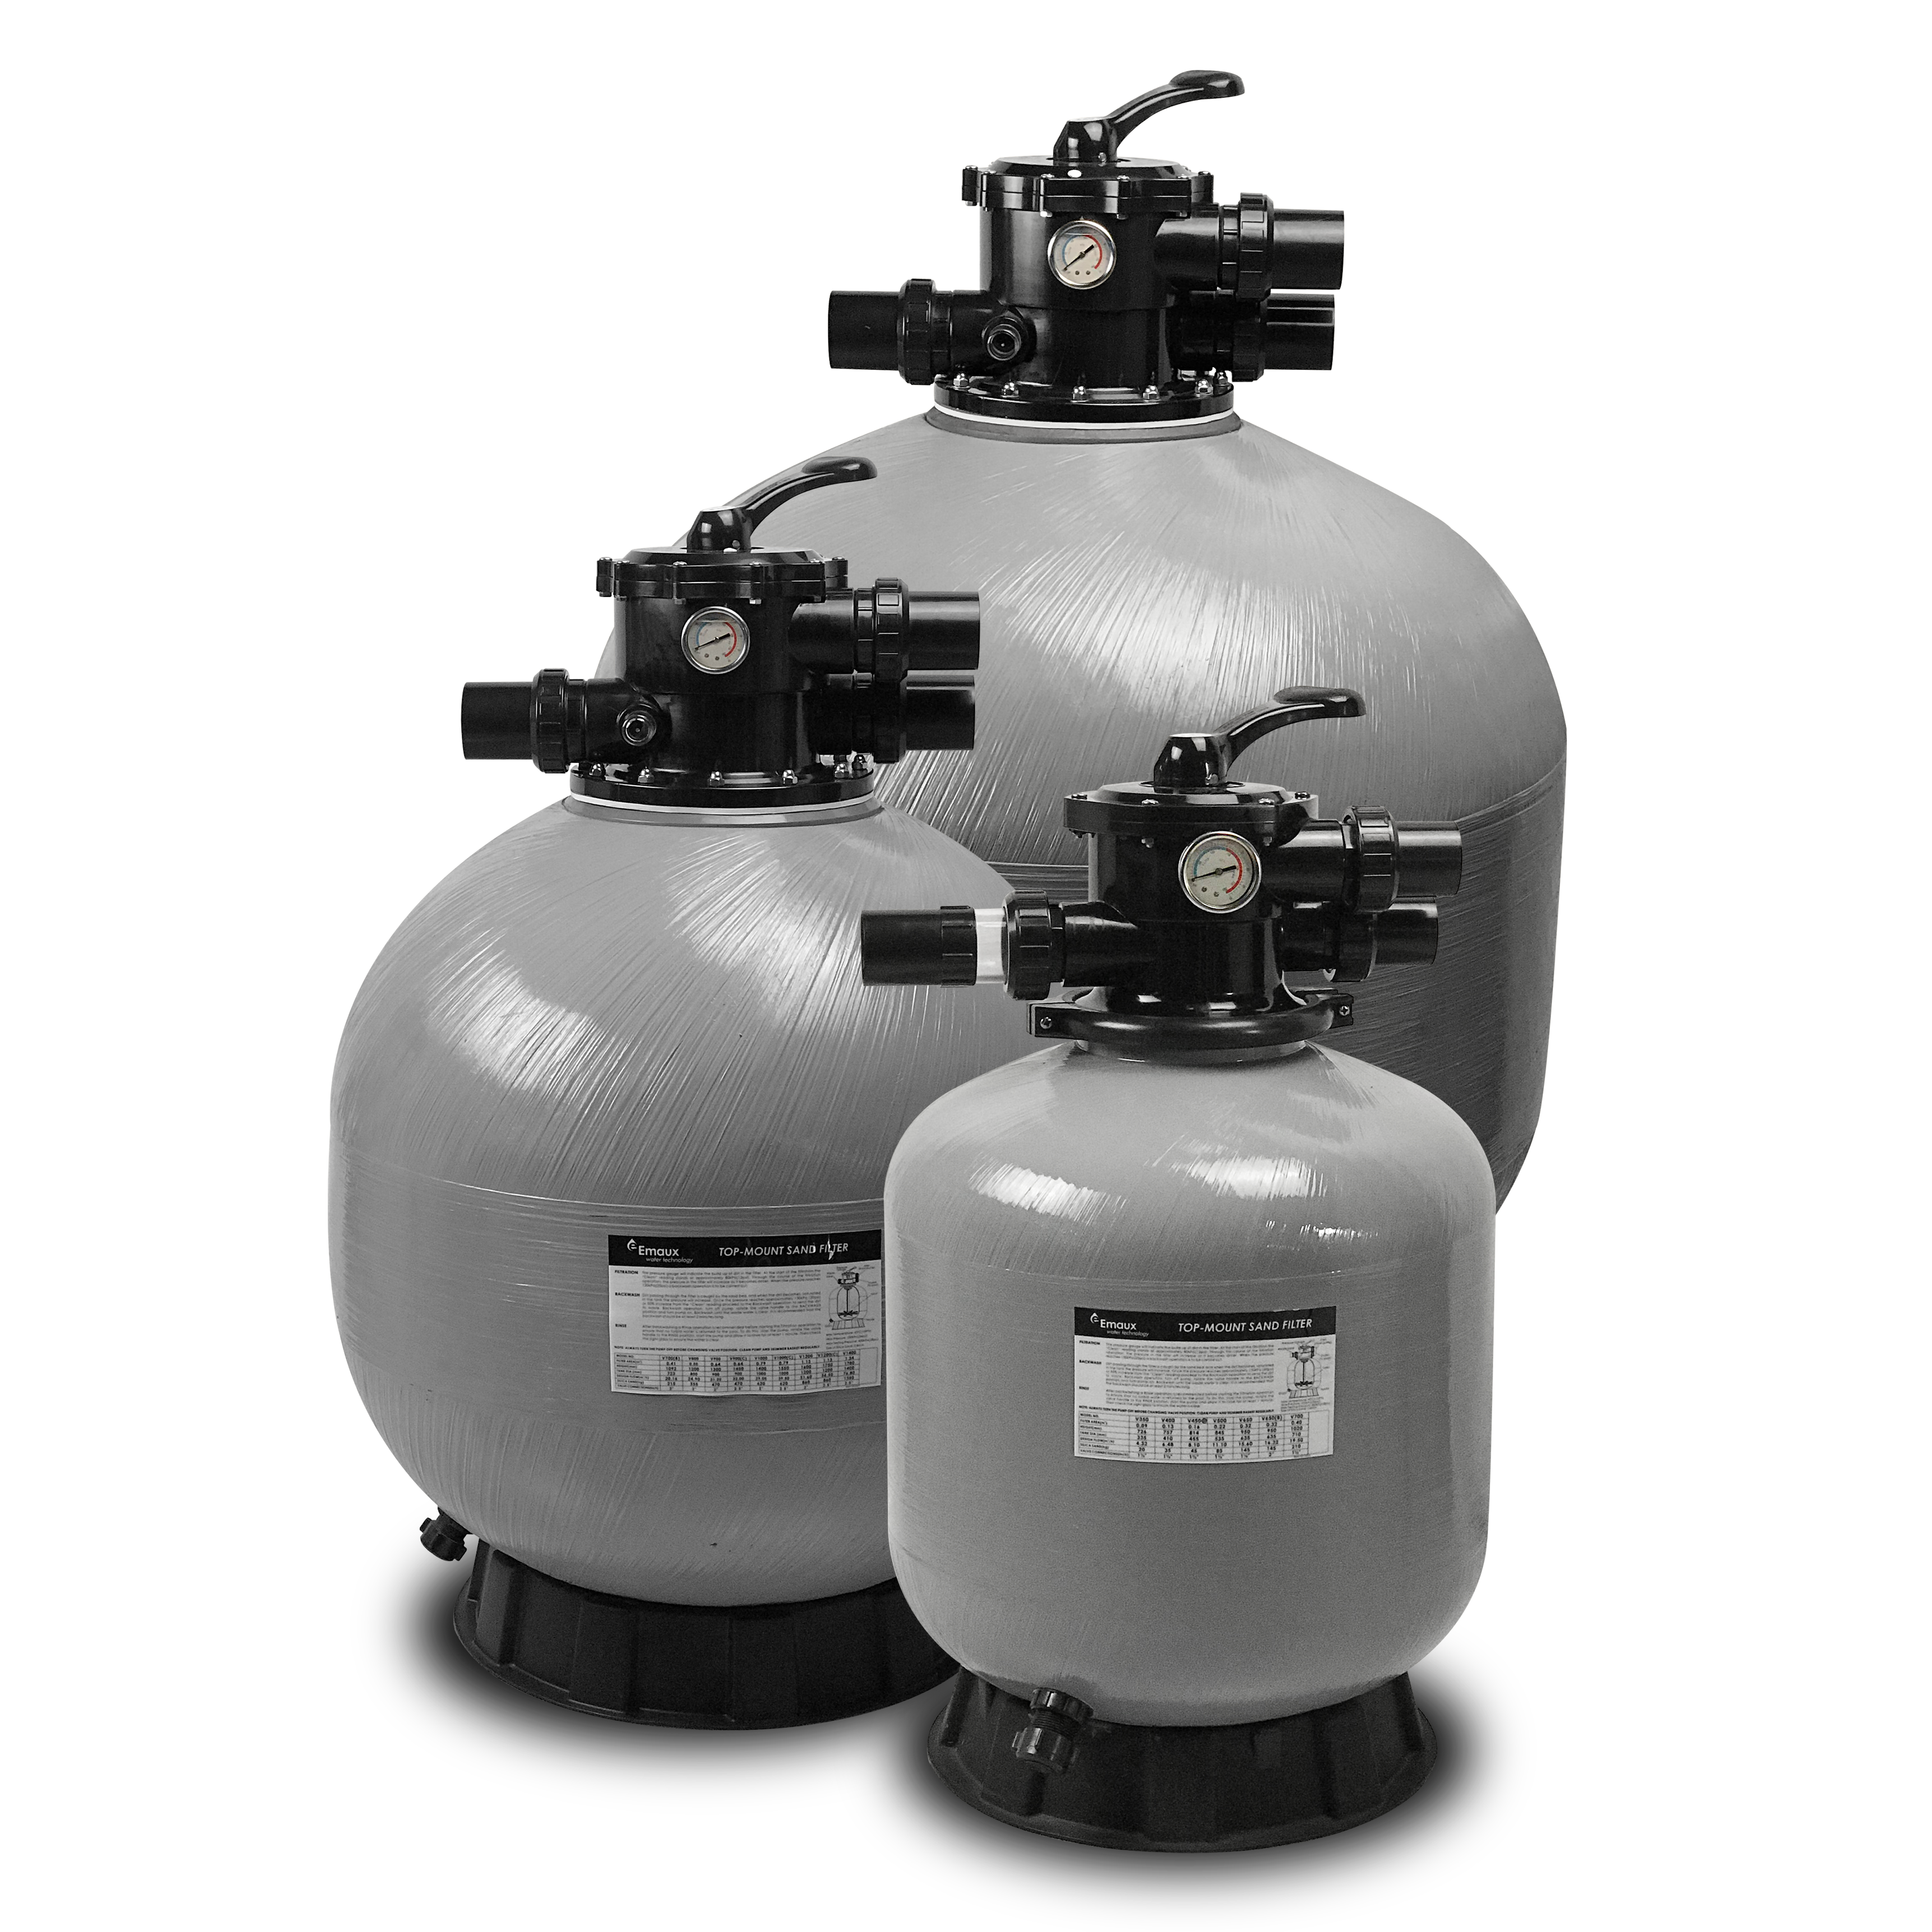 Family of 3 sand filters, each in grey-coloured bobbin wound material, top mount valve connection, black union connections, and black-coloured valves